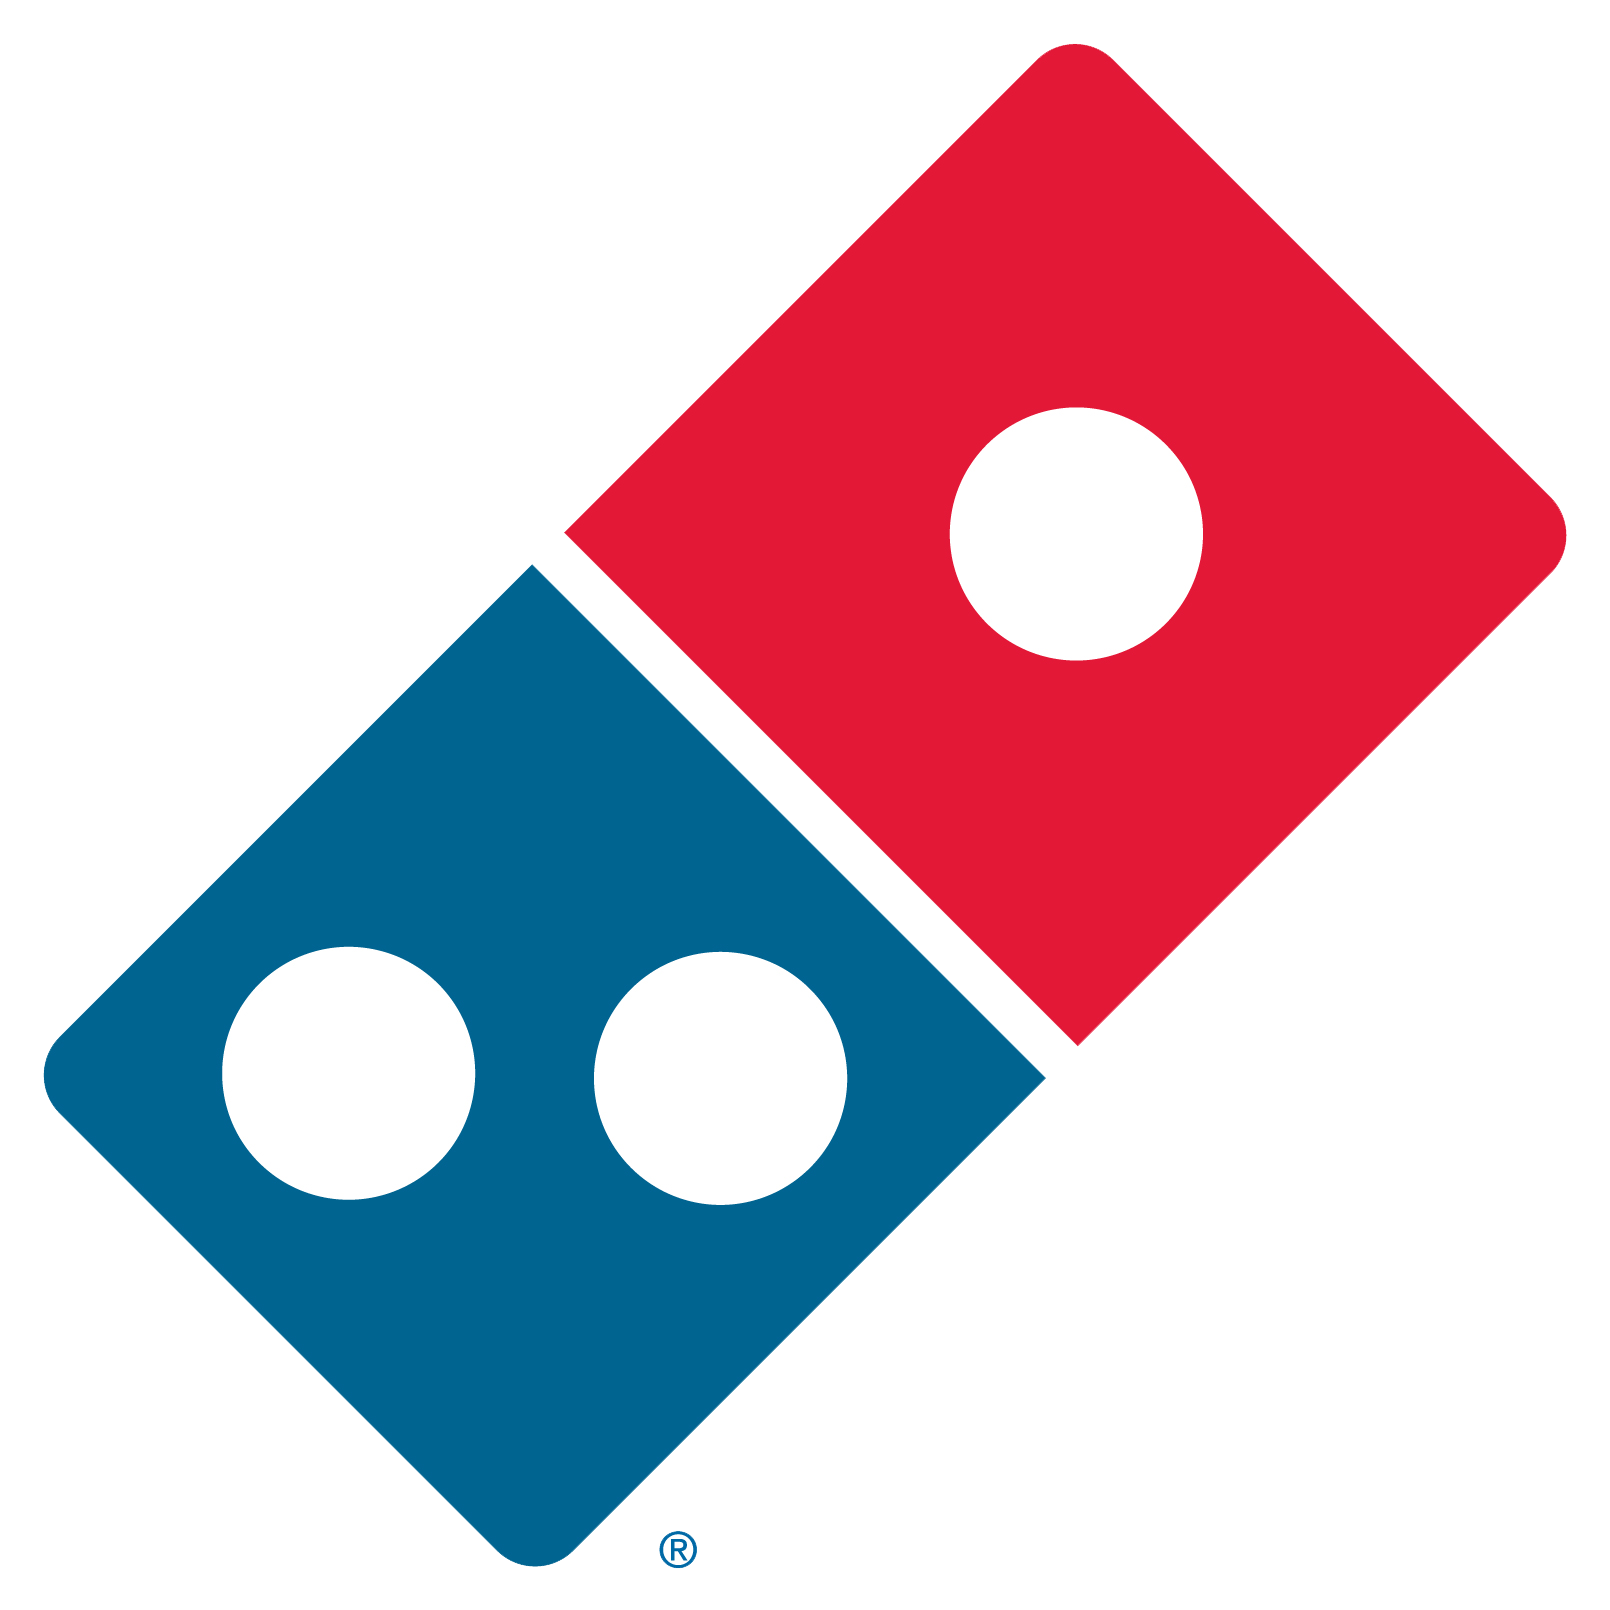 Dominos_RGB_Blue_Type_Tile_Only_Transparent